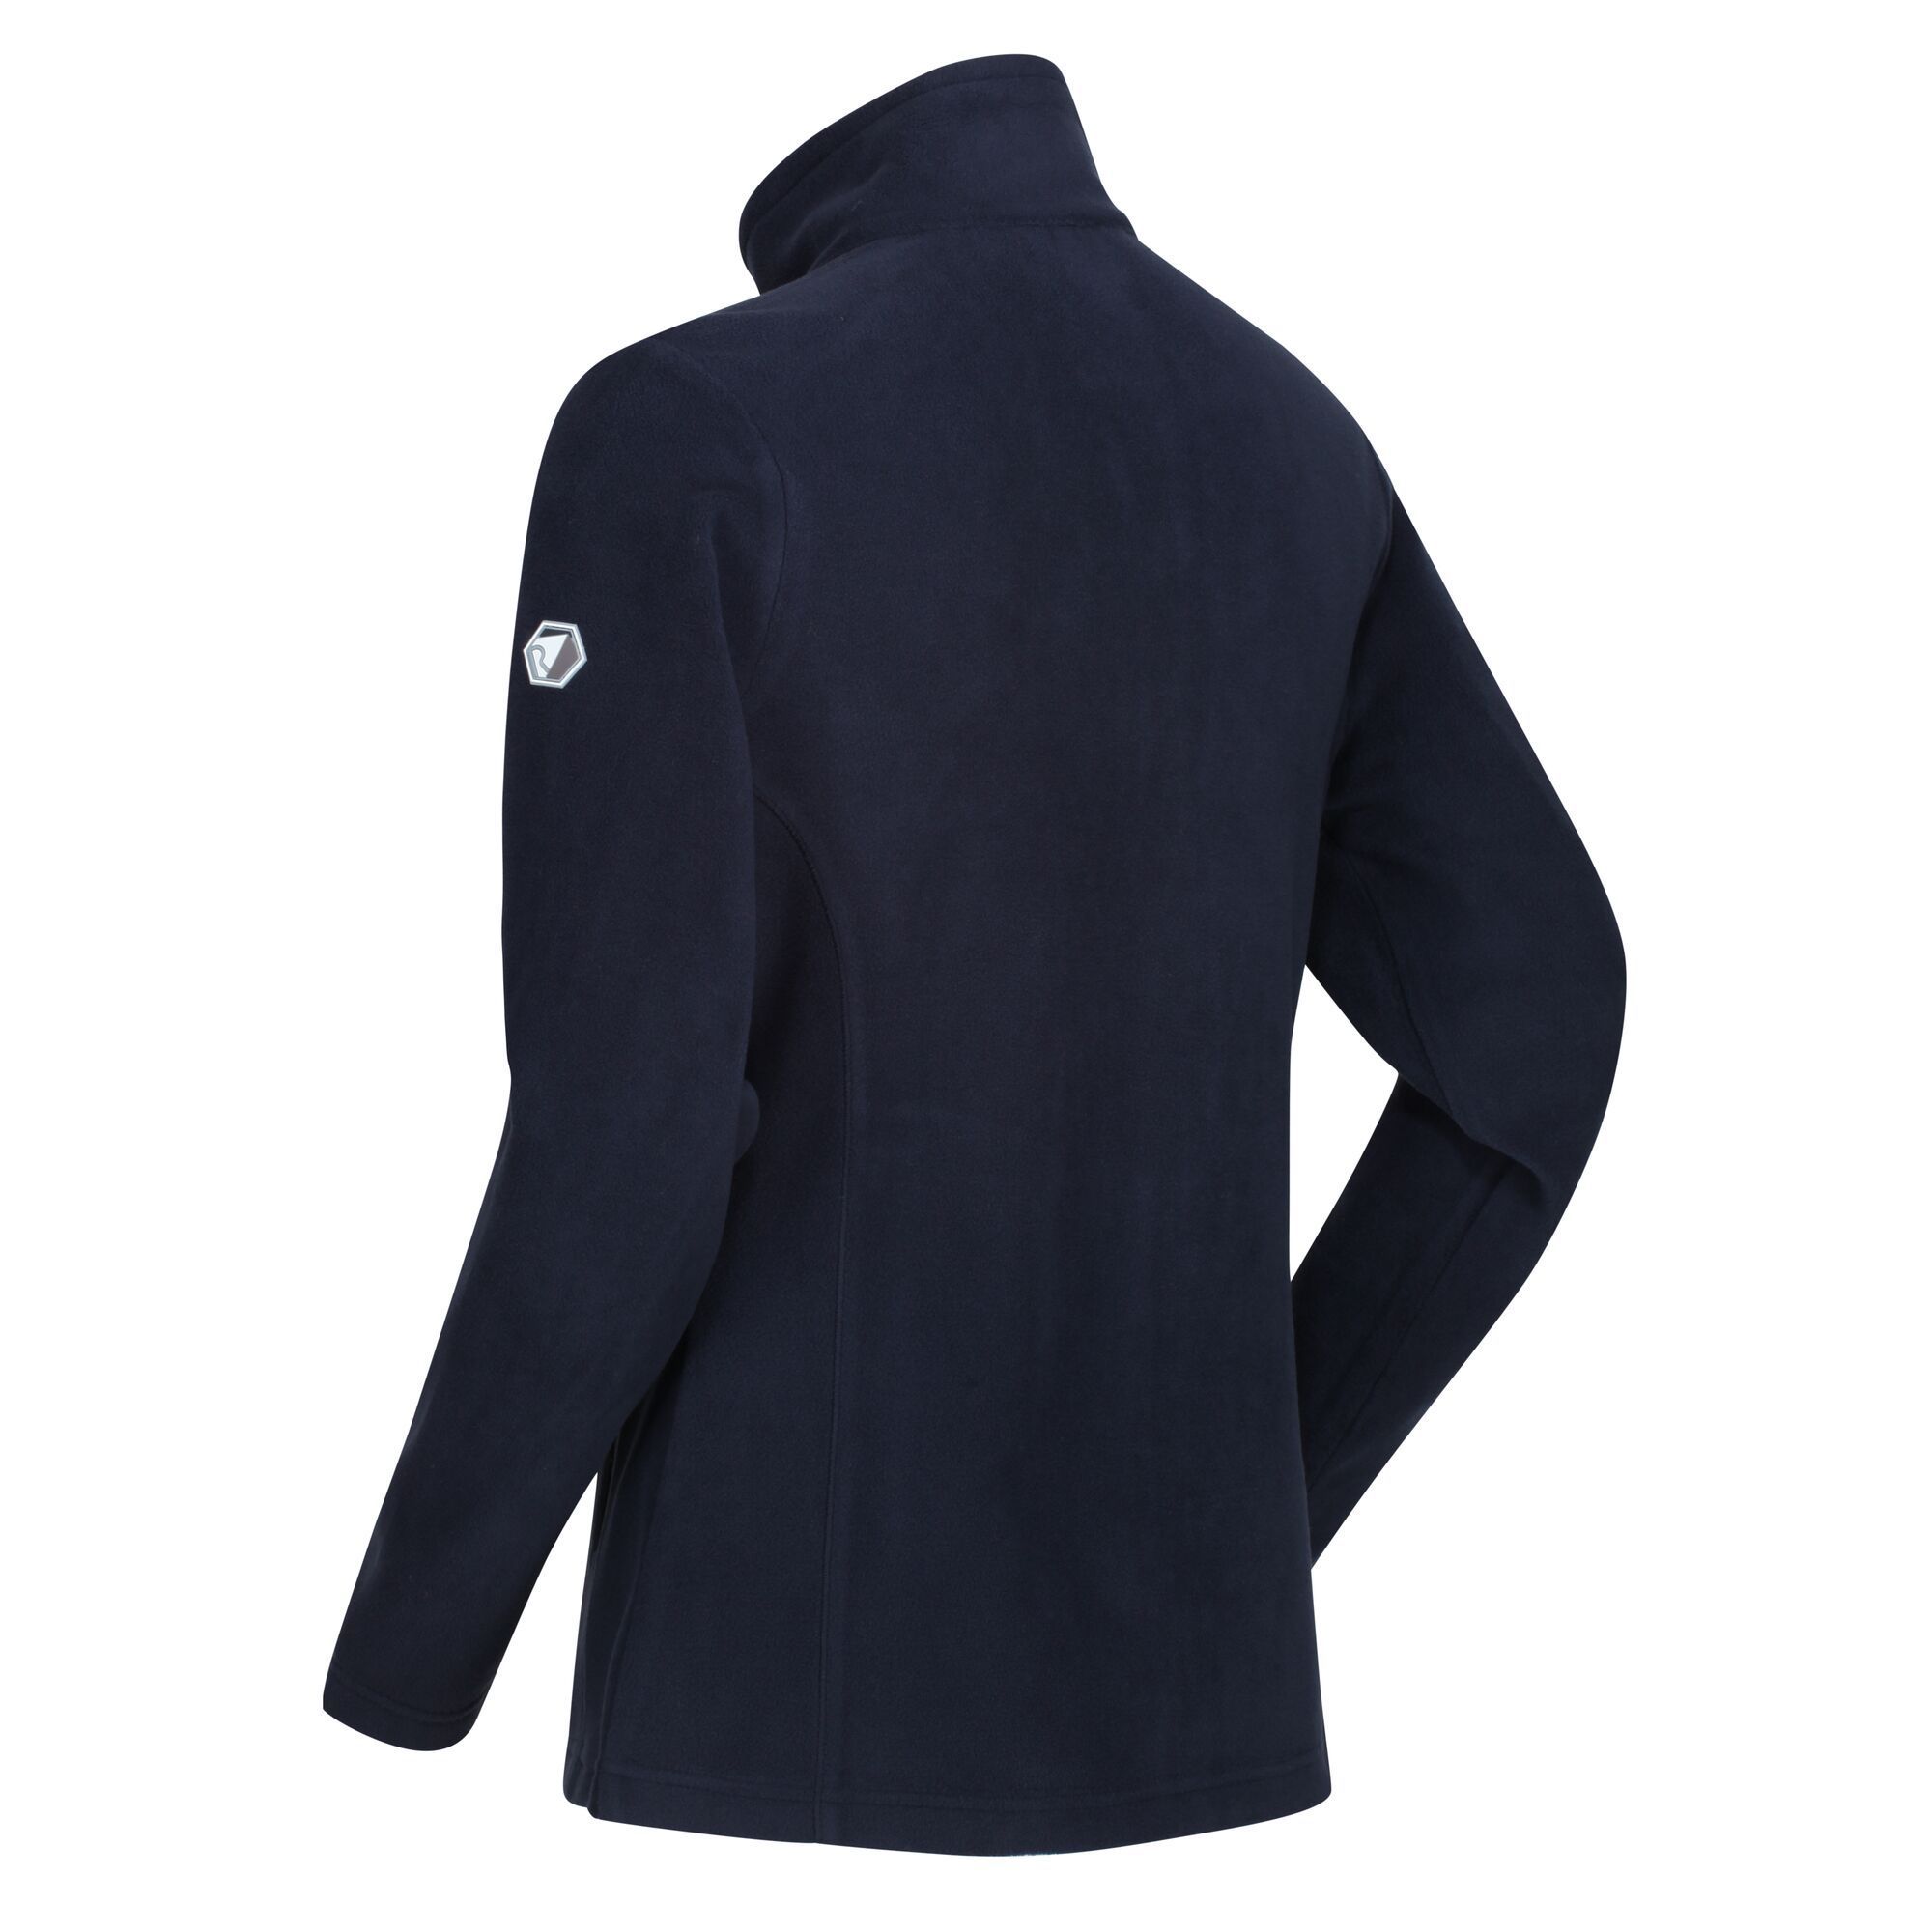 Material: 100% Polyester. Fabric: Brushed, Midweight. 240gsm. Design: Logo. Fabric Technology: Anti-Pilling, Durable, Insulating, Symmetry. Shockcord Hem, Stretch Binding. Cuff: Adjustable. Sleeve-Type: Long-Sleeved. Neckline: Standing Collar. Pockets: 2 Lower Pockets, Zip. Fastening: Full Zip.